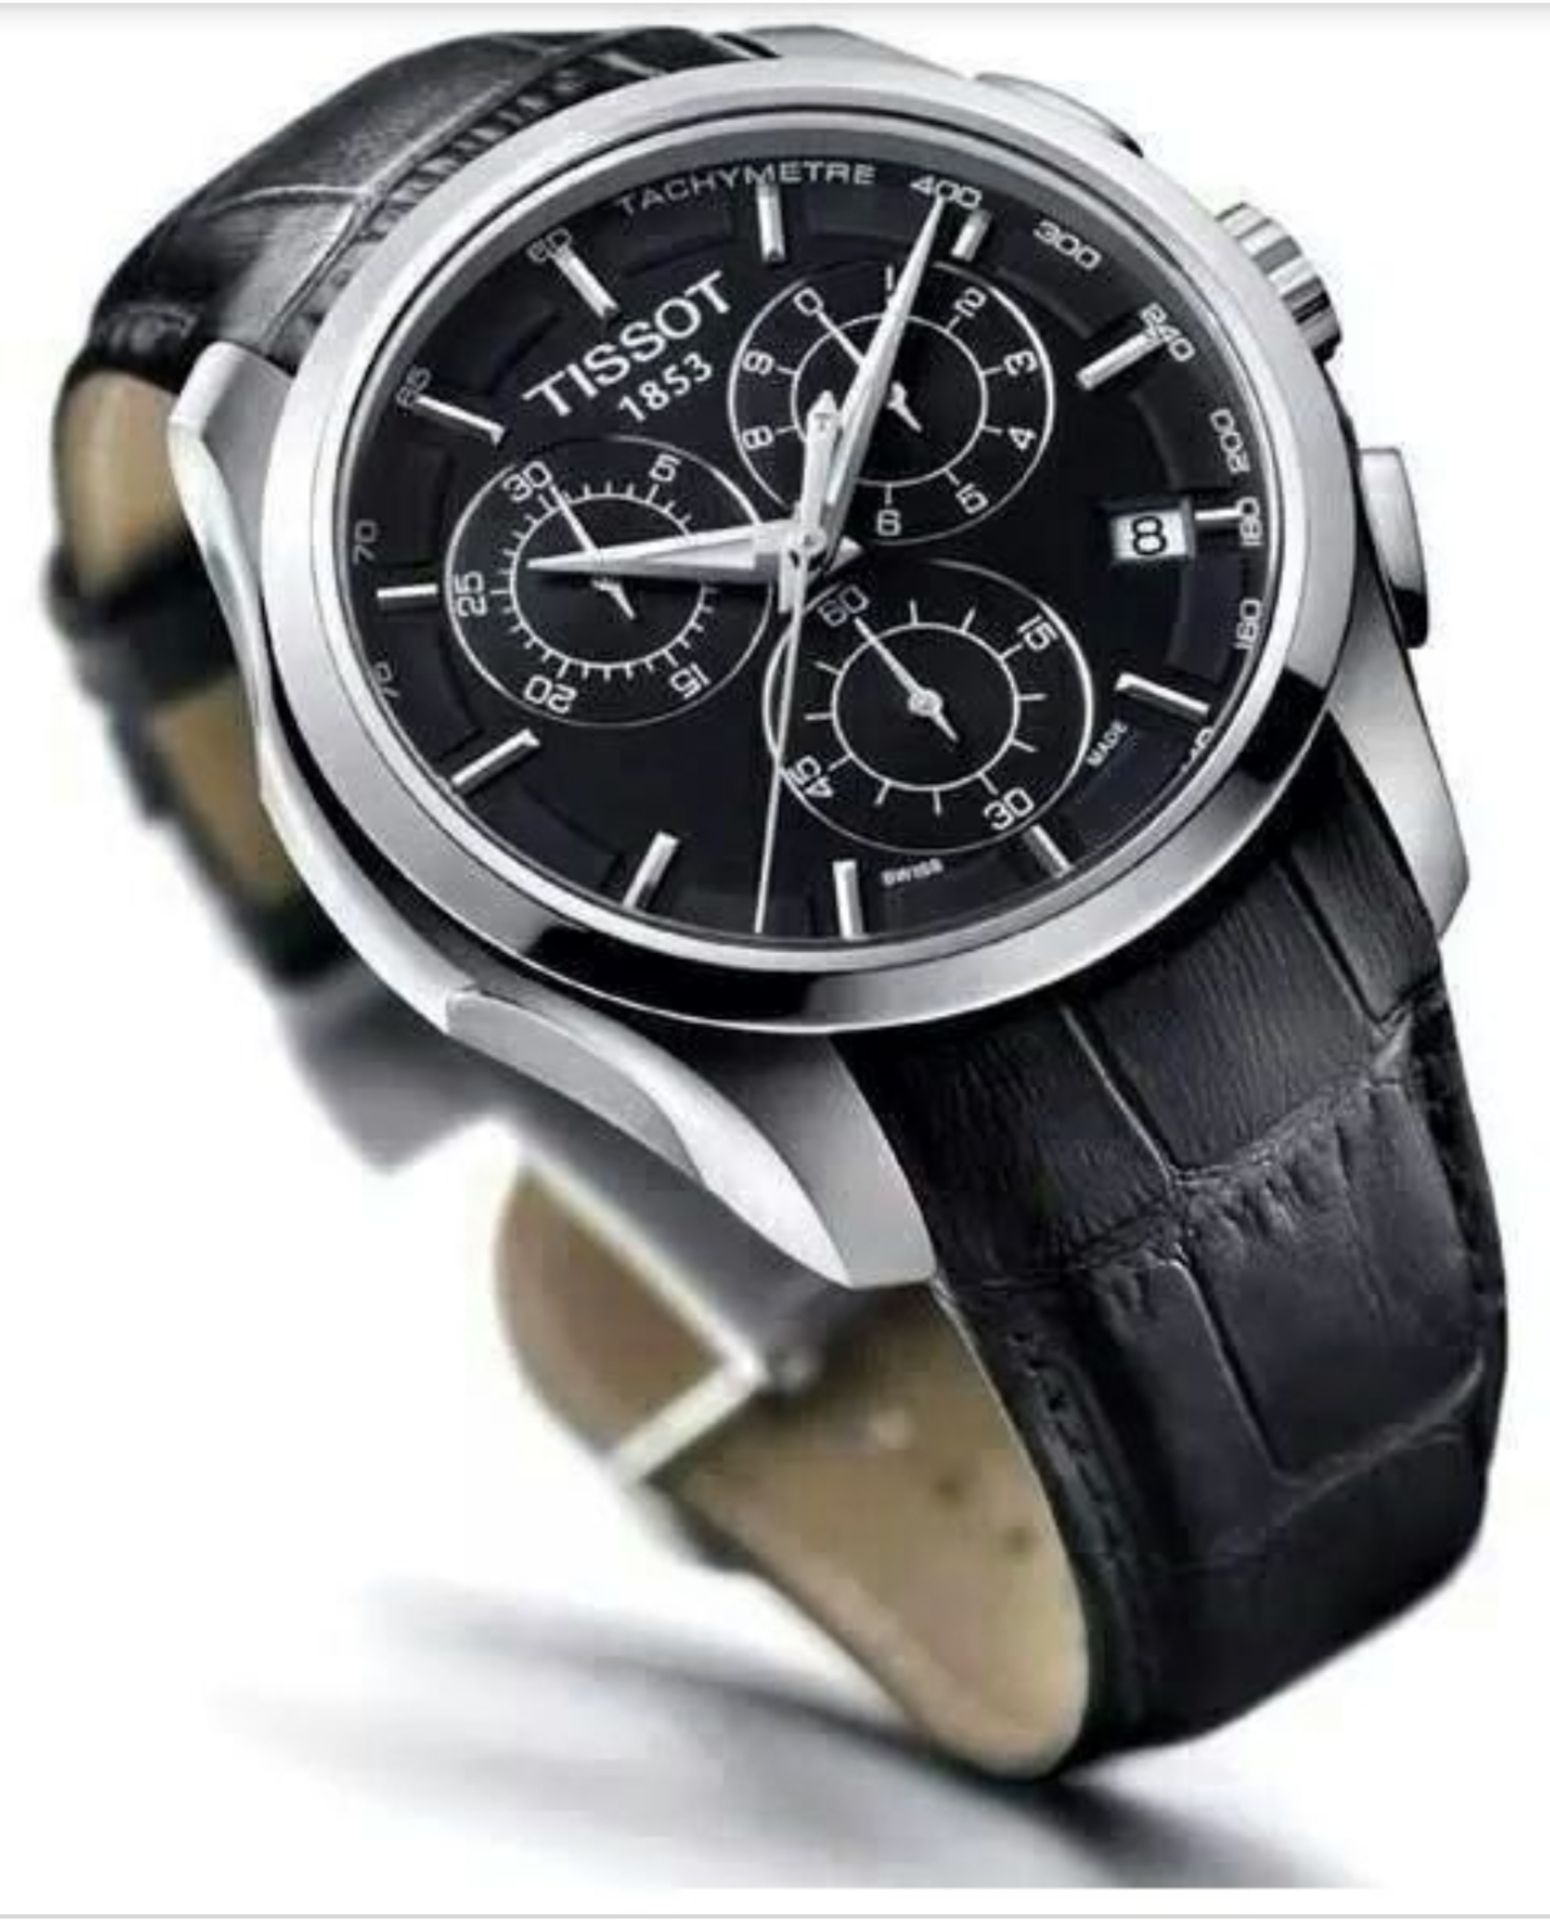 Tissot T-Trend Couturier T035.617.16.051.00 Chronograph Watch For Men - Image 9 of 11